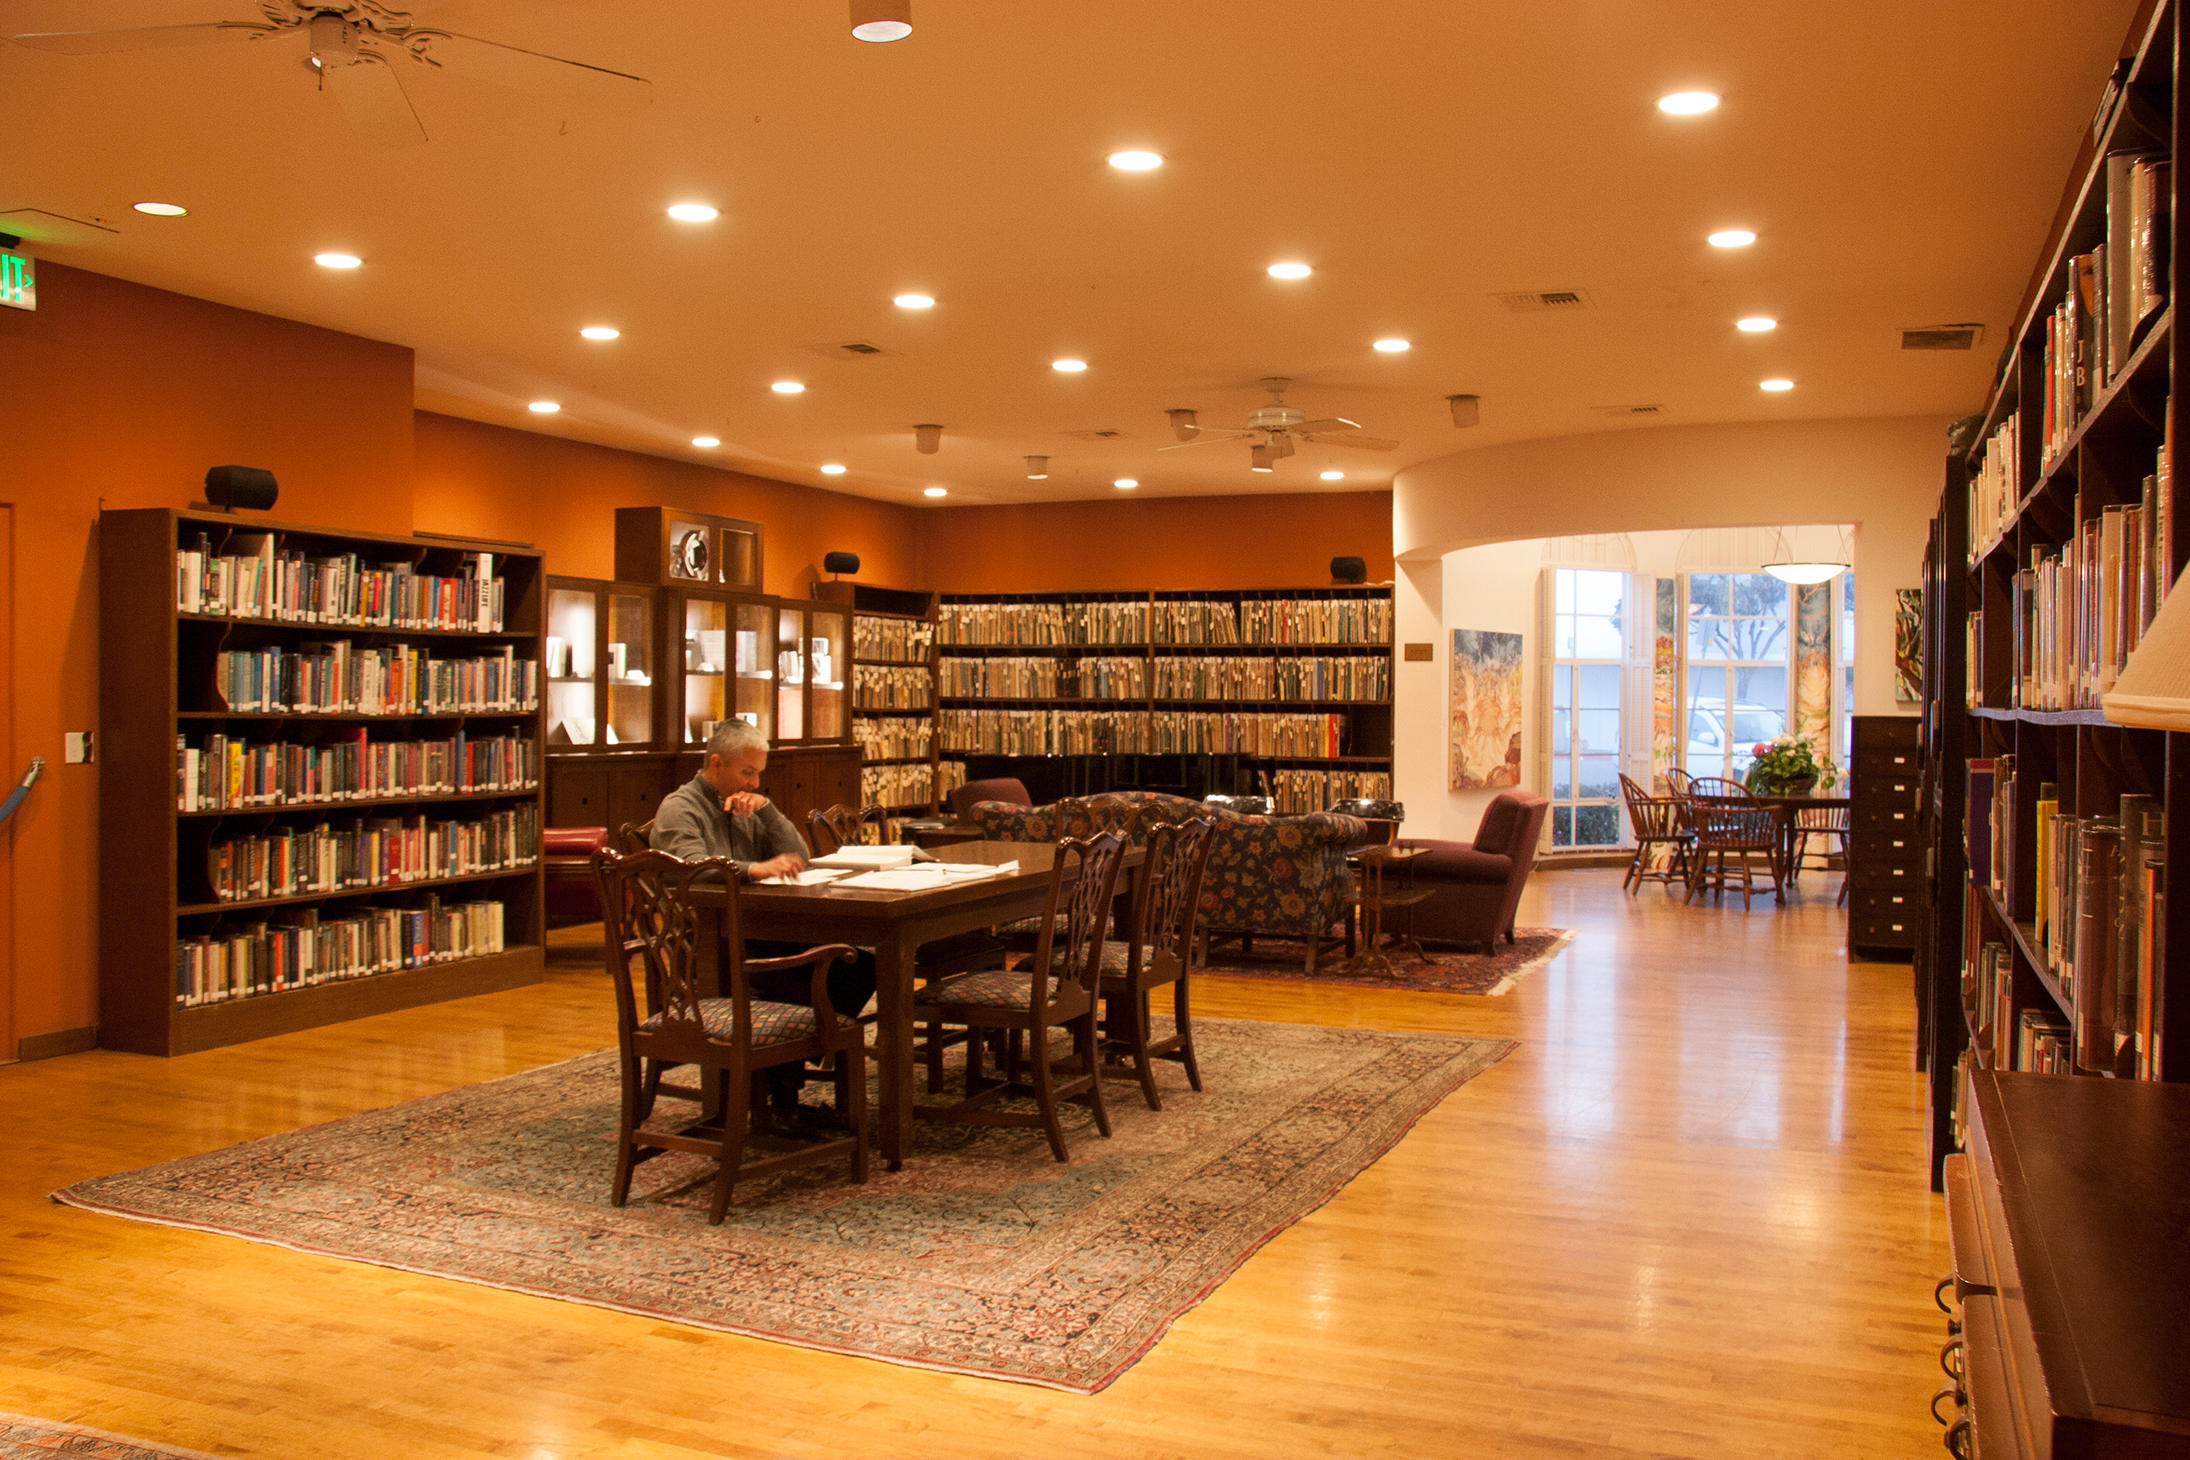 Absolutely Electric, Inc. - The Athenaeum - Reading Room Lighting Design, LED upgrades and lighting controls